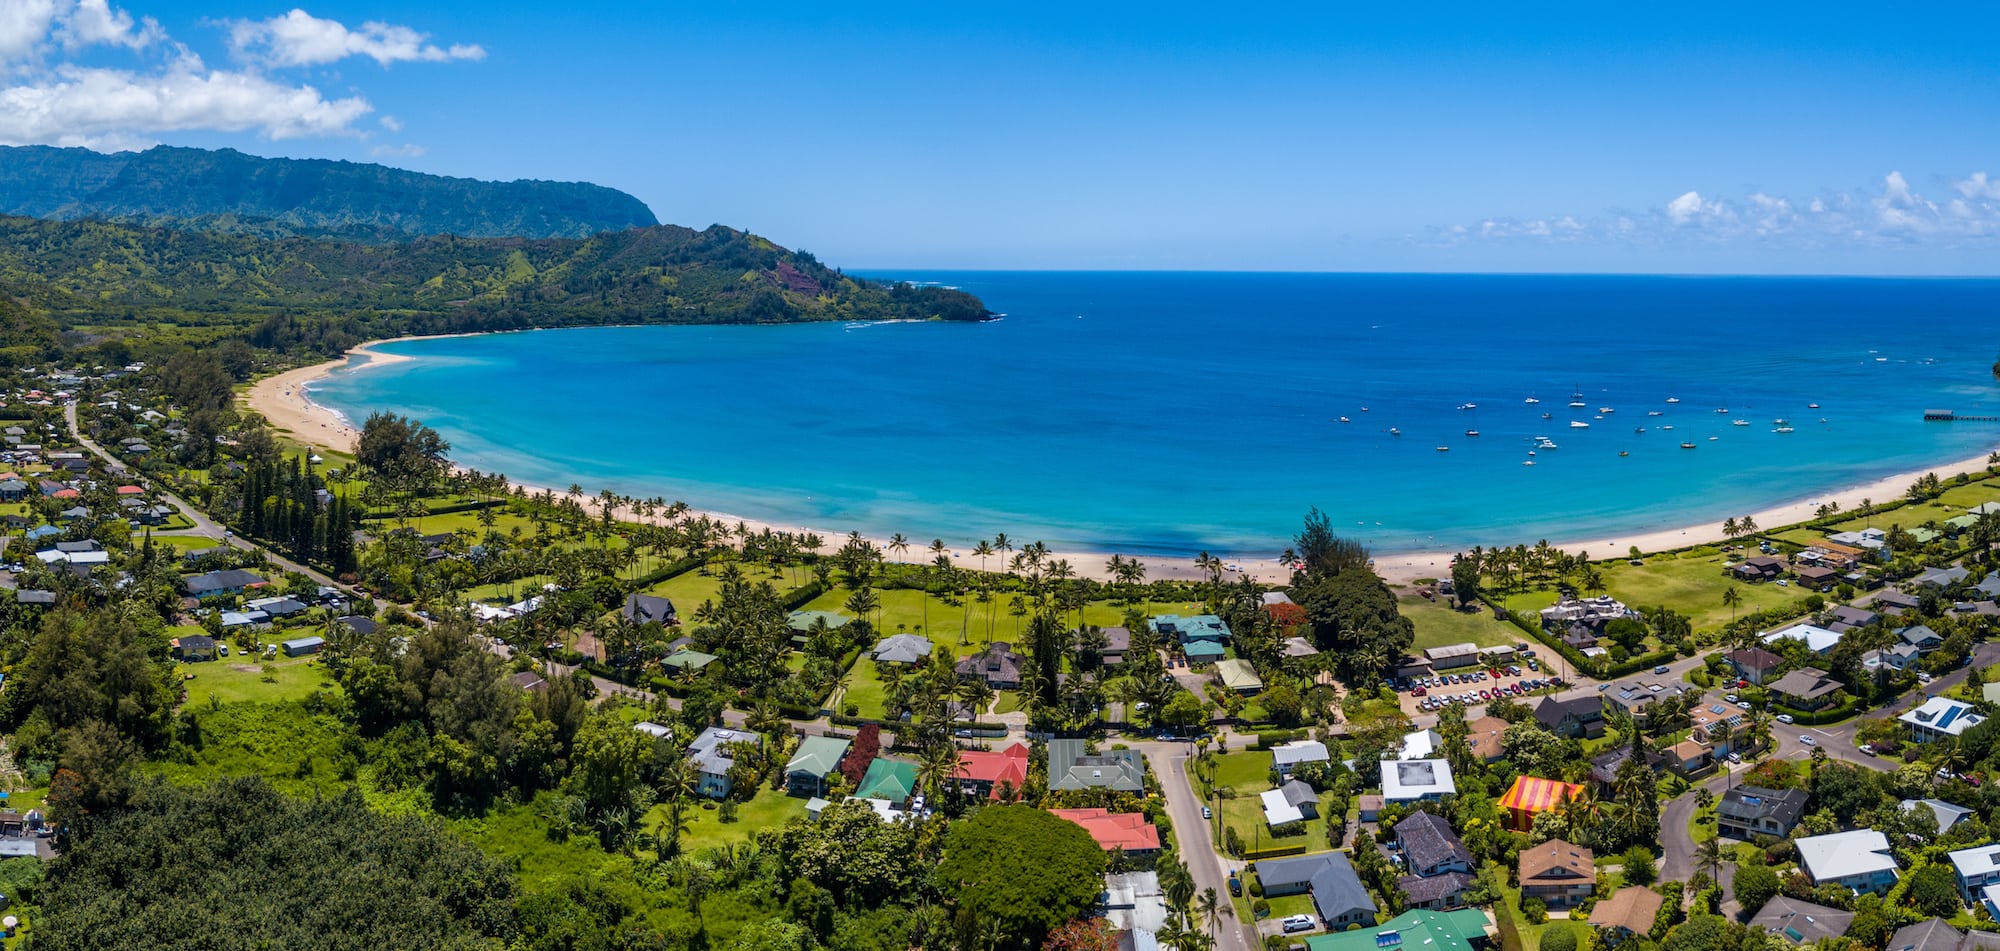 Hanalei Bay // Discover the best things to do in Kauai for outdoor adventurers including scenic waterfall hikes, secluded beaches, water activities, & more!